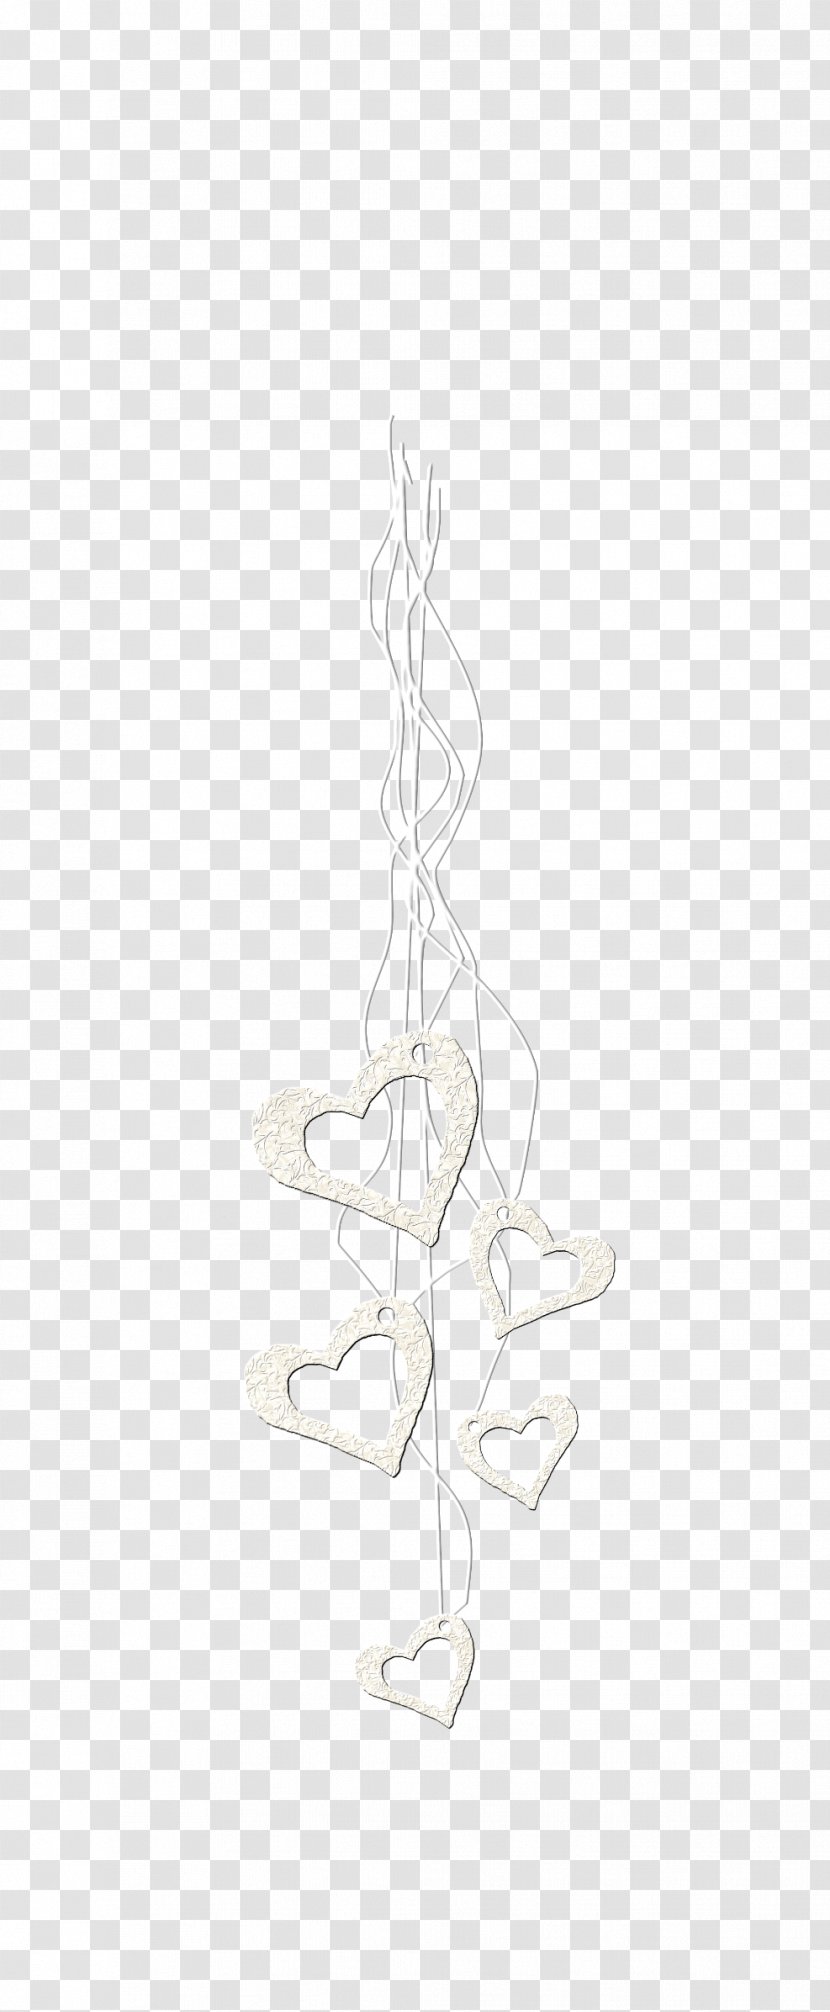 Computer Graphics Icon - Rope - Peach Heart Jewelry Transparent PNG